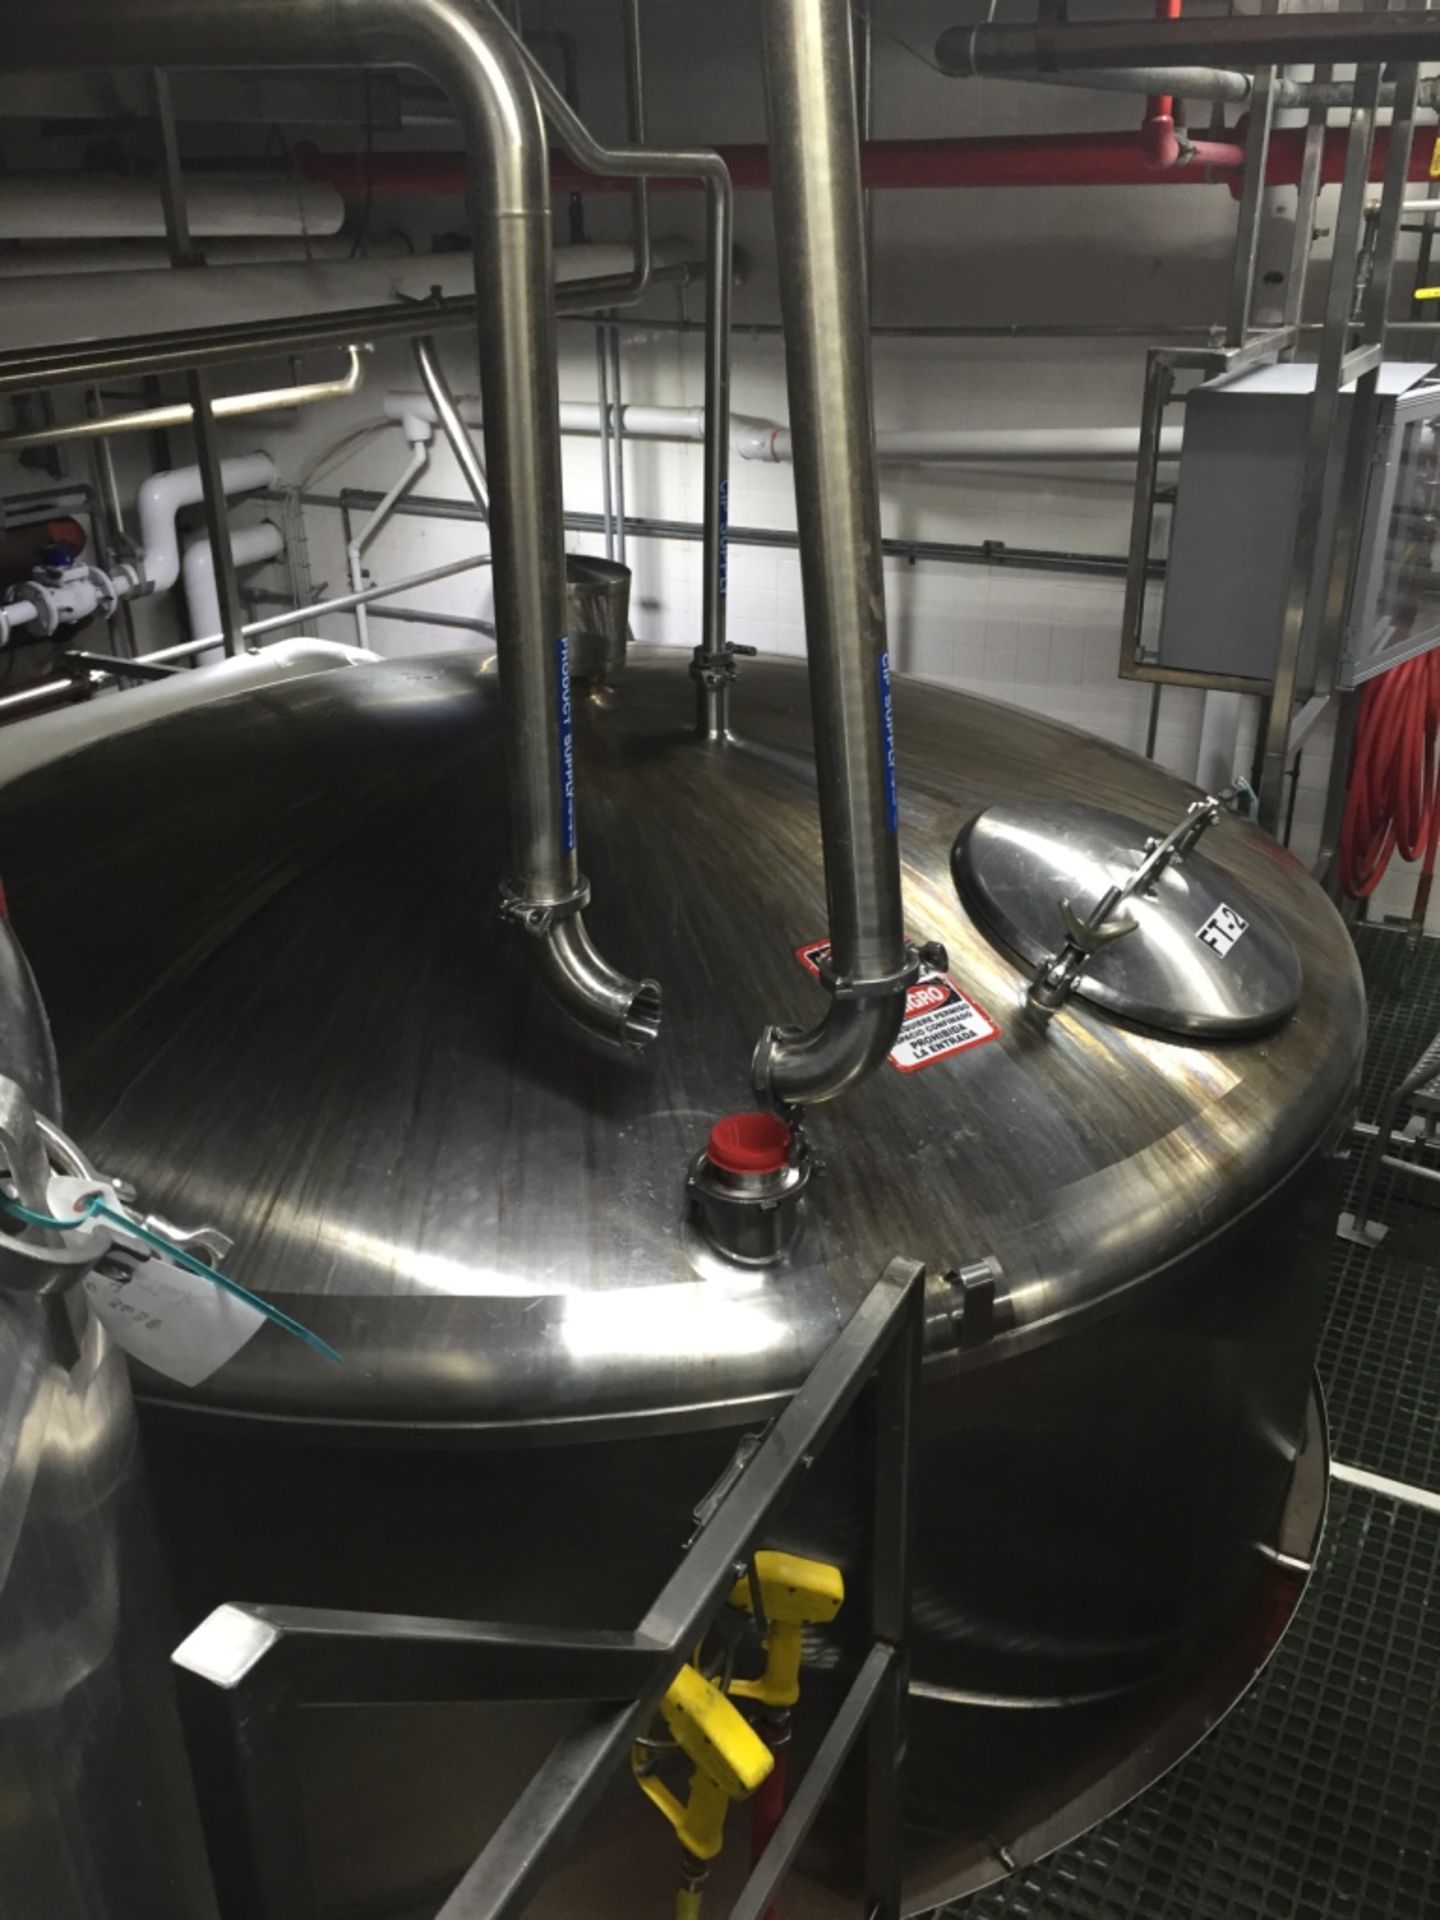 SFI (Stainless Fabrication Incorporated) 3000 Gallon Fermentation Tank S/N 4378-5 Atmos - Rigging Fe - Image 2 of 4